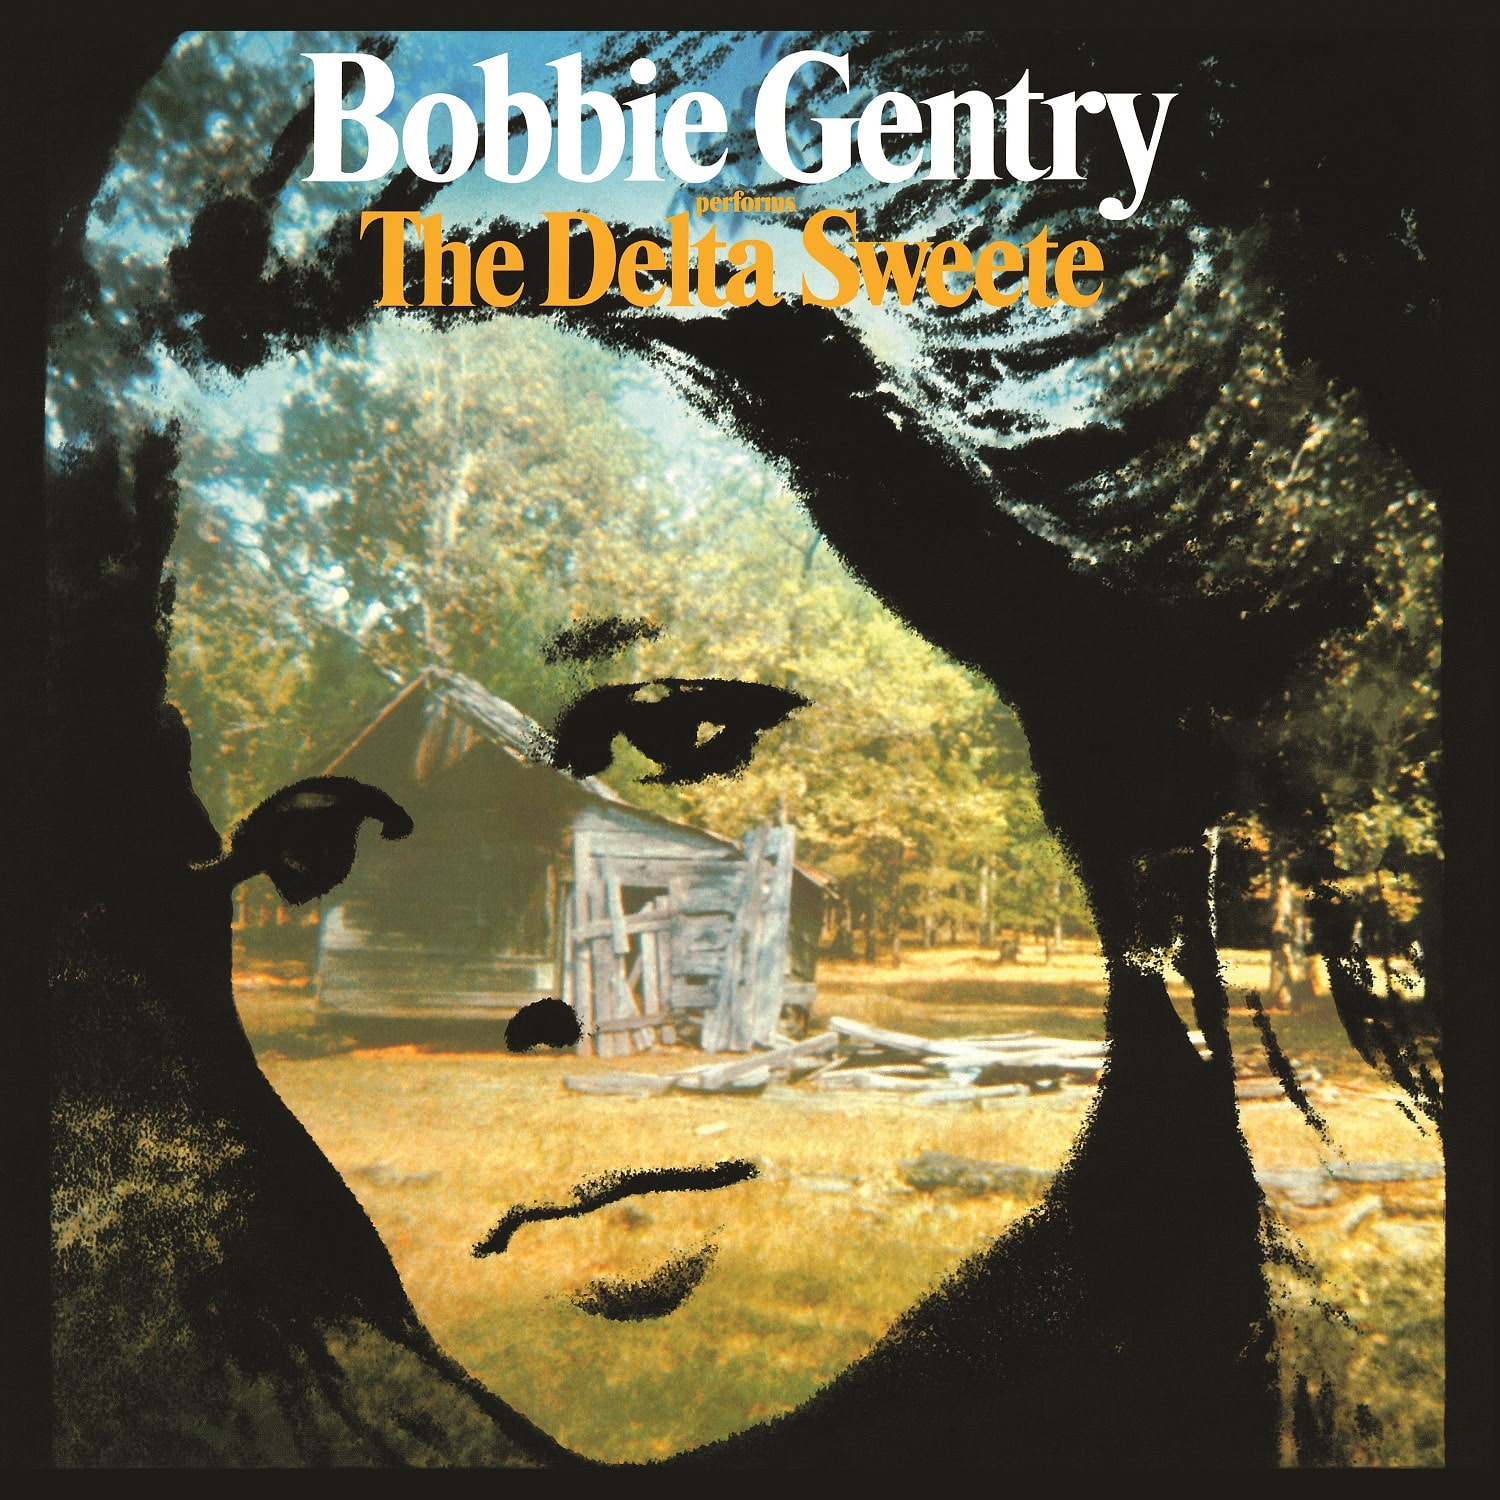 Bobbie Gentry’s ‘Delta Sweete’ Displays Her Diverse Talents In a Long Overdue Expanded Release